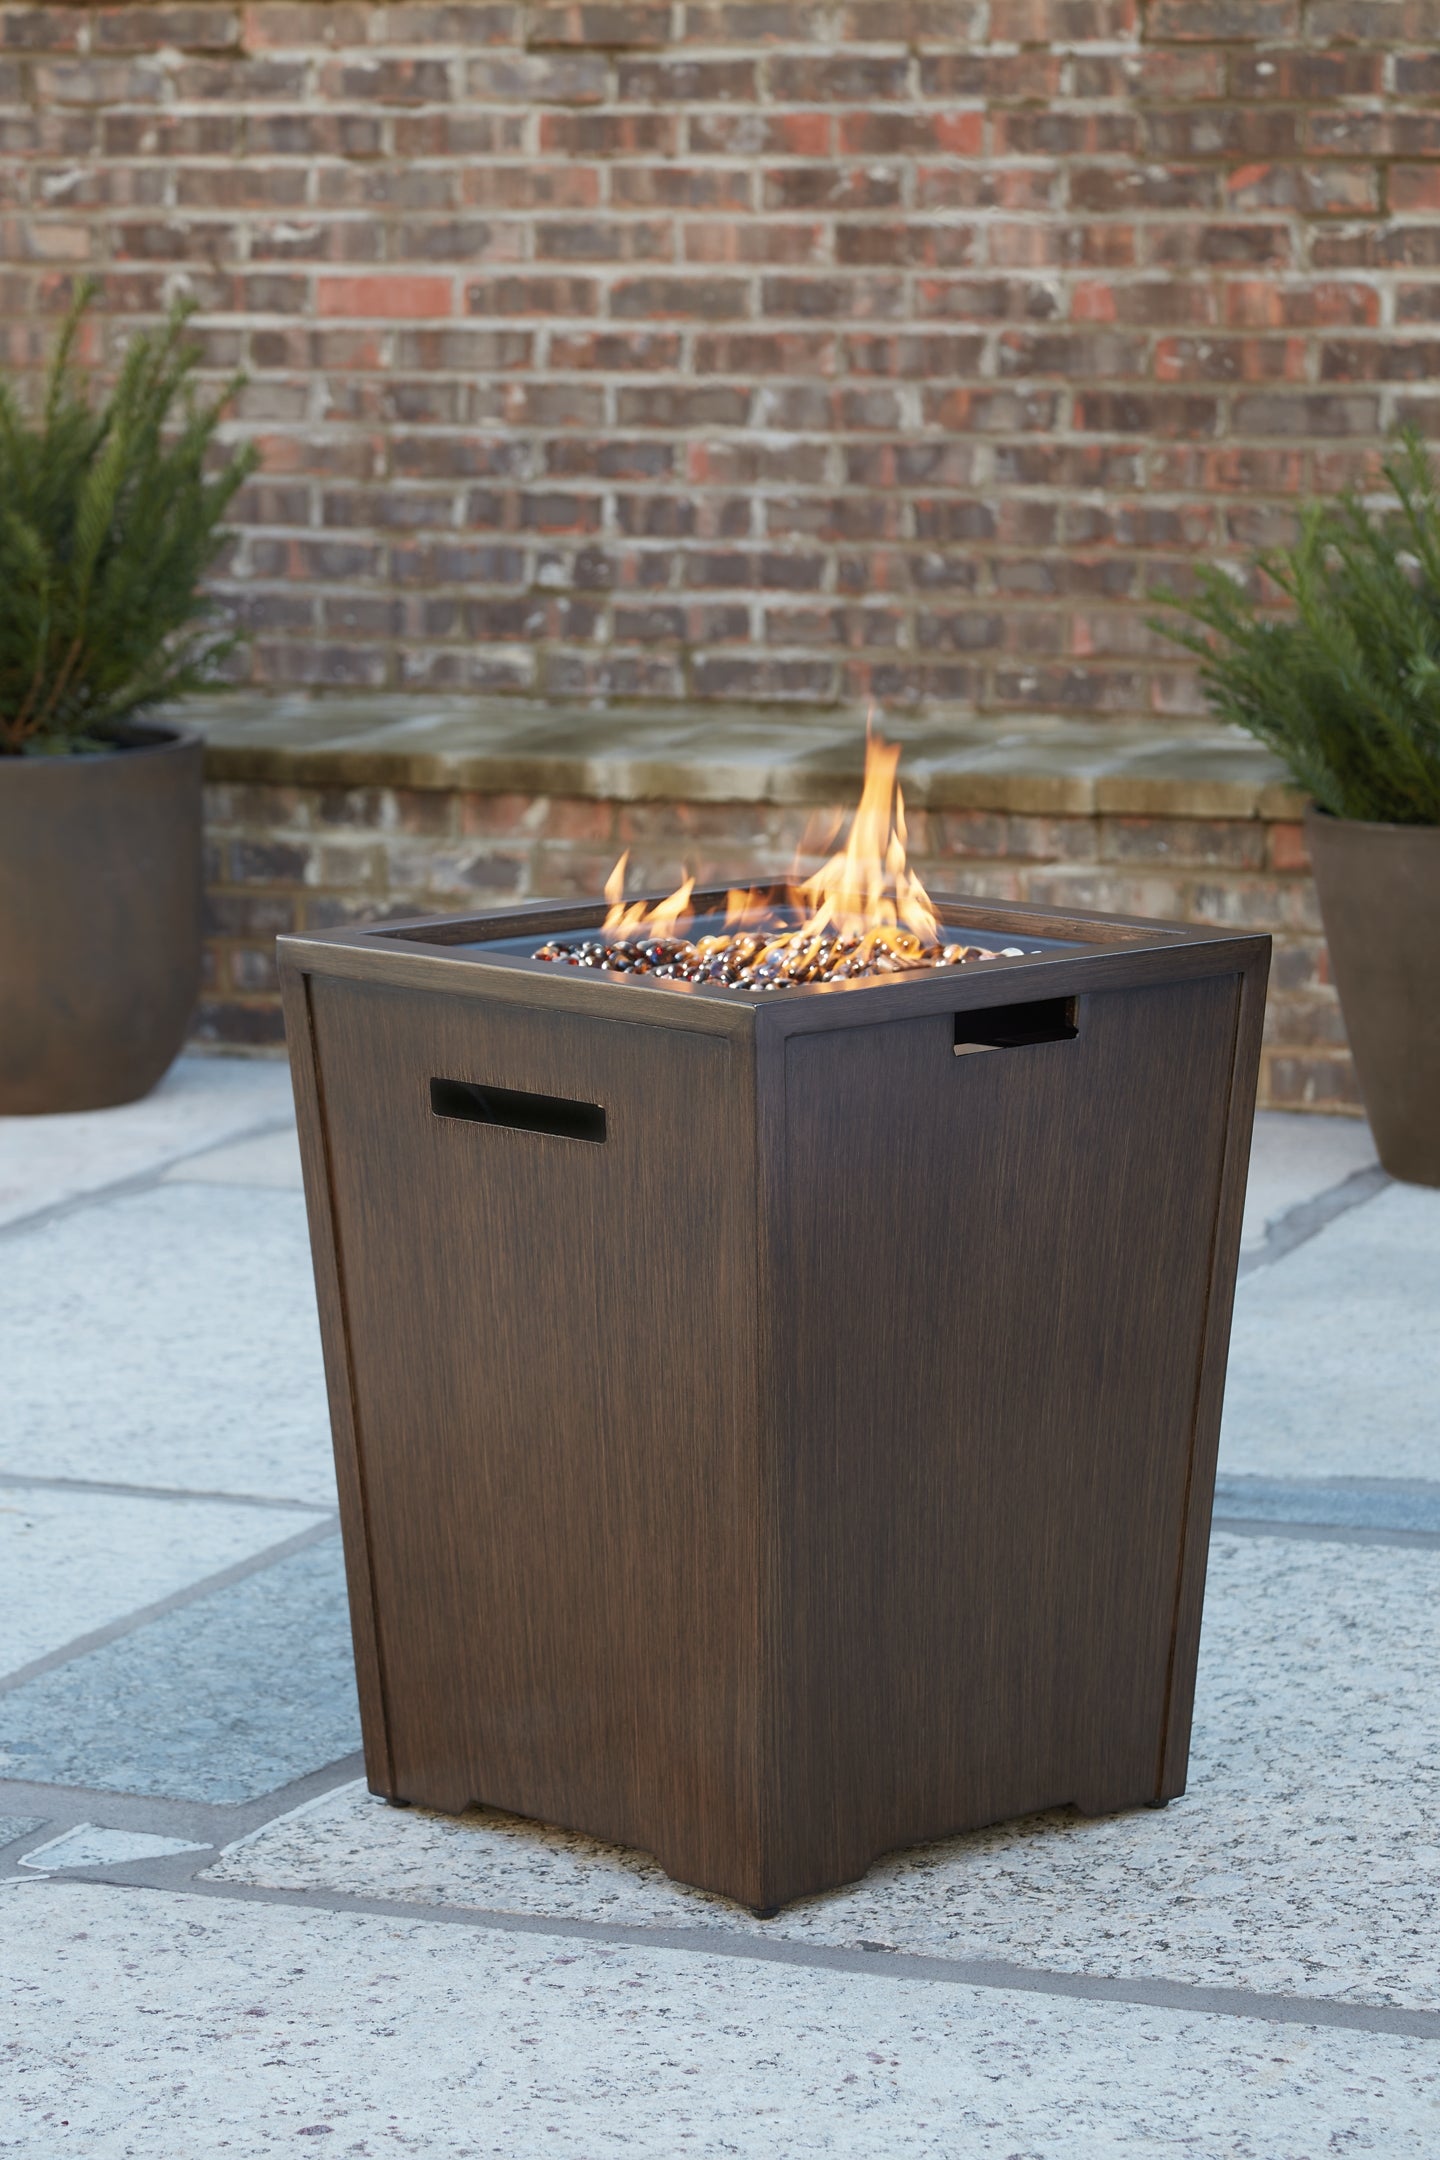 Rodeway South Outdoor Fire Pit Table and 4 Chairs Milwaukee Furniture of Chicago - Furniture Store in Chicago Serving Humbolt Park, Roscoe Village, Avondale, & Homan Square